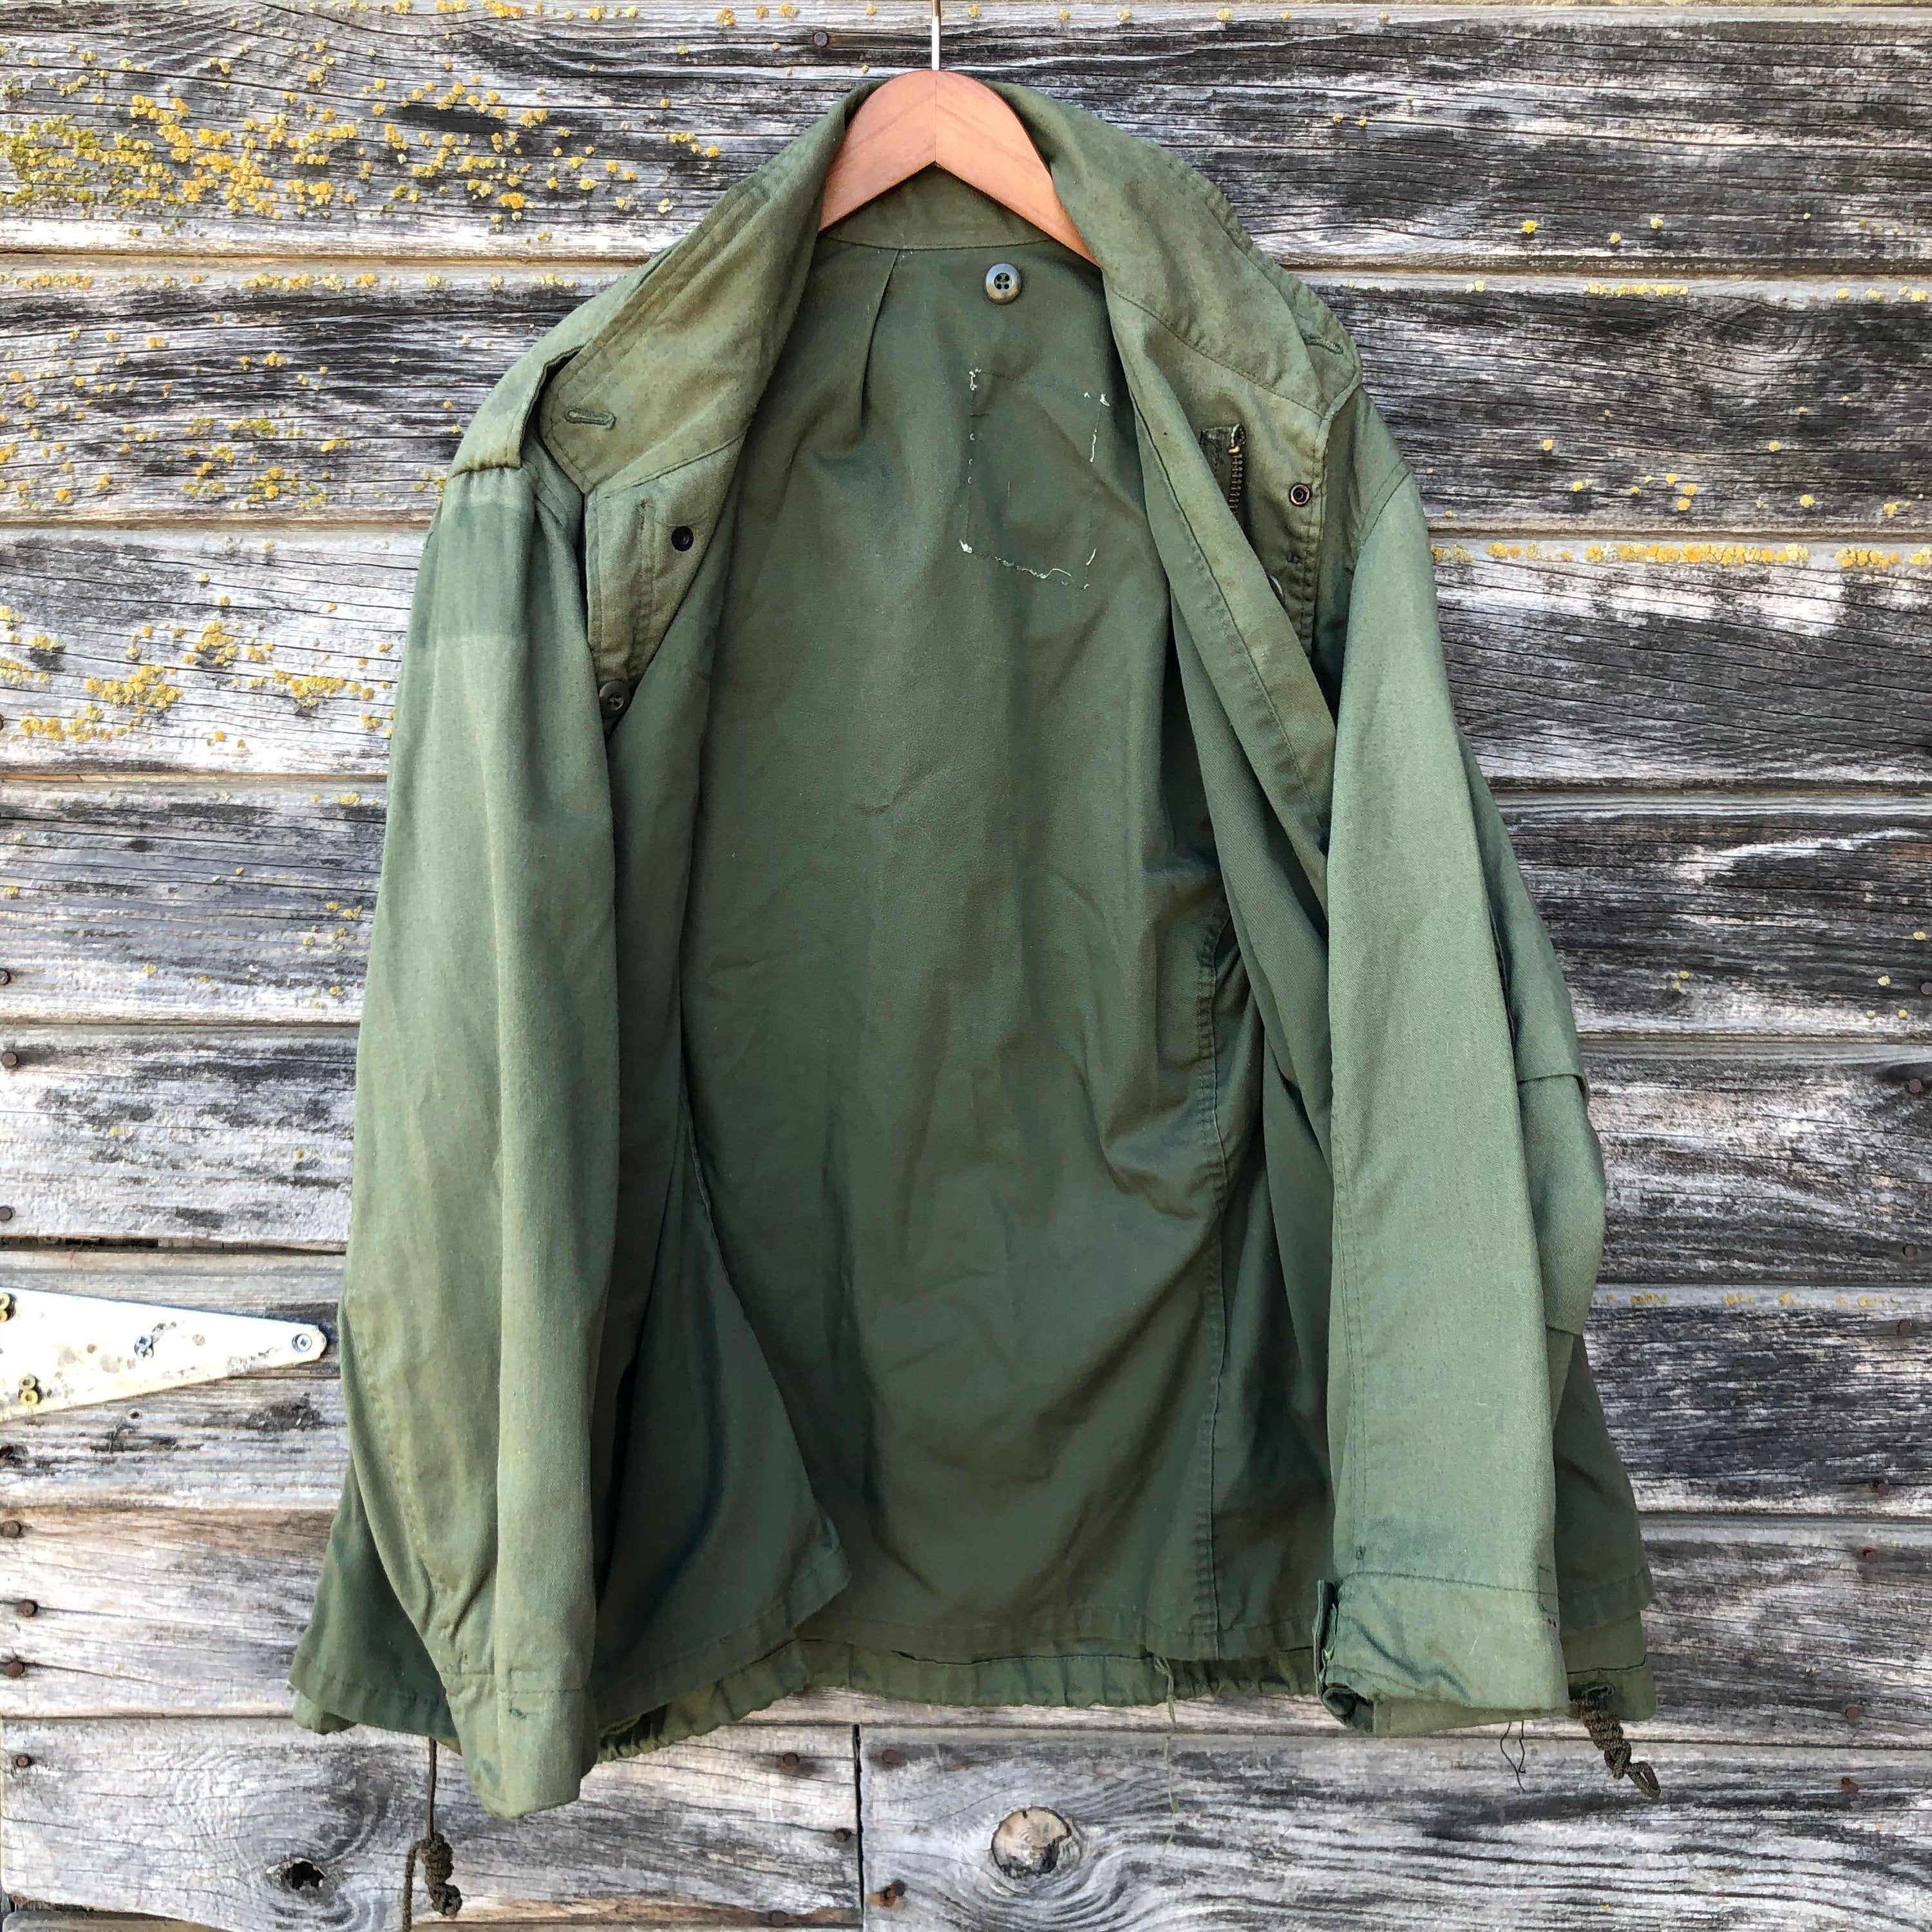 Vintage US Army Olive Green Military Jacket | Shop THRILLING